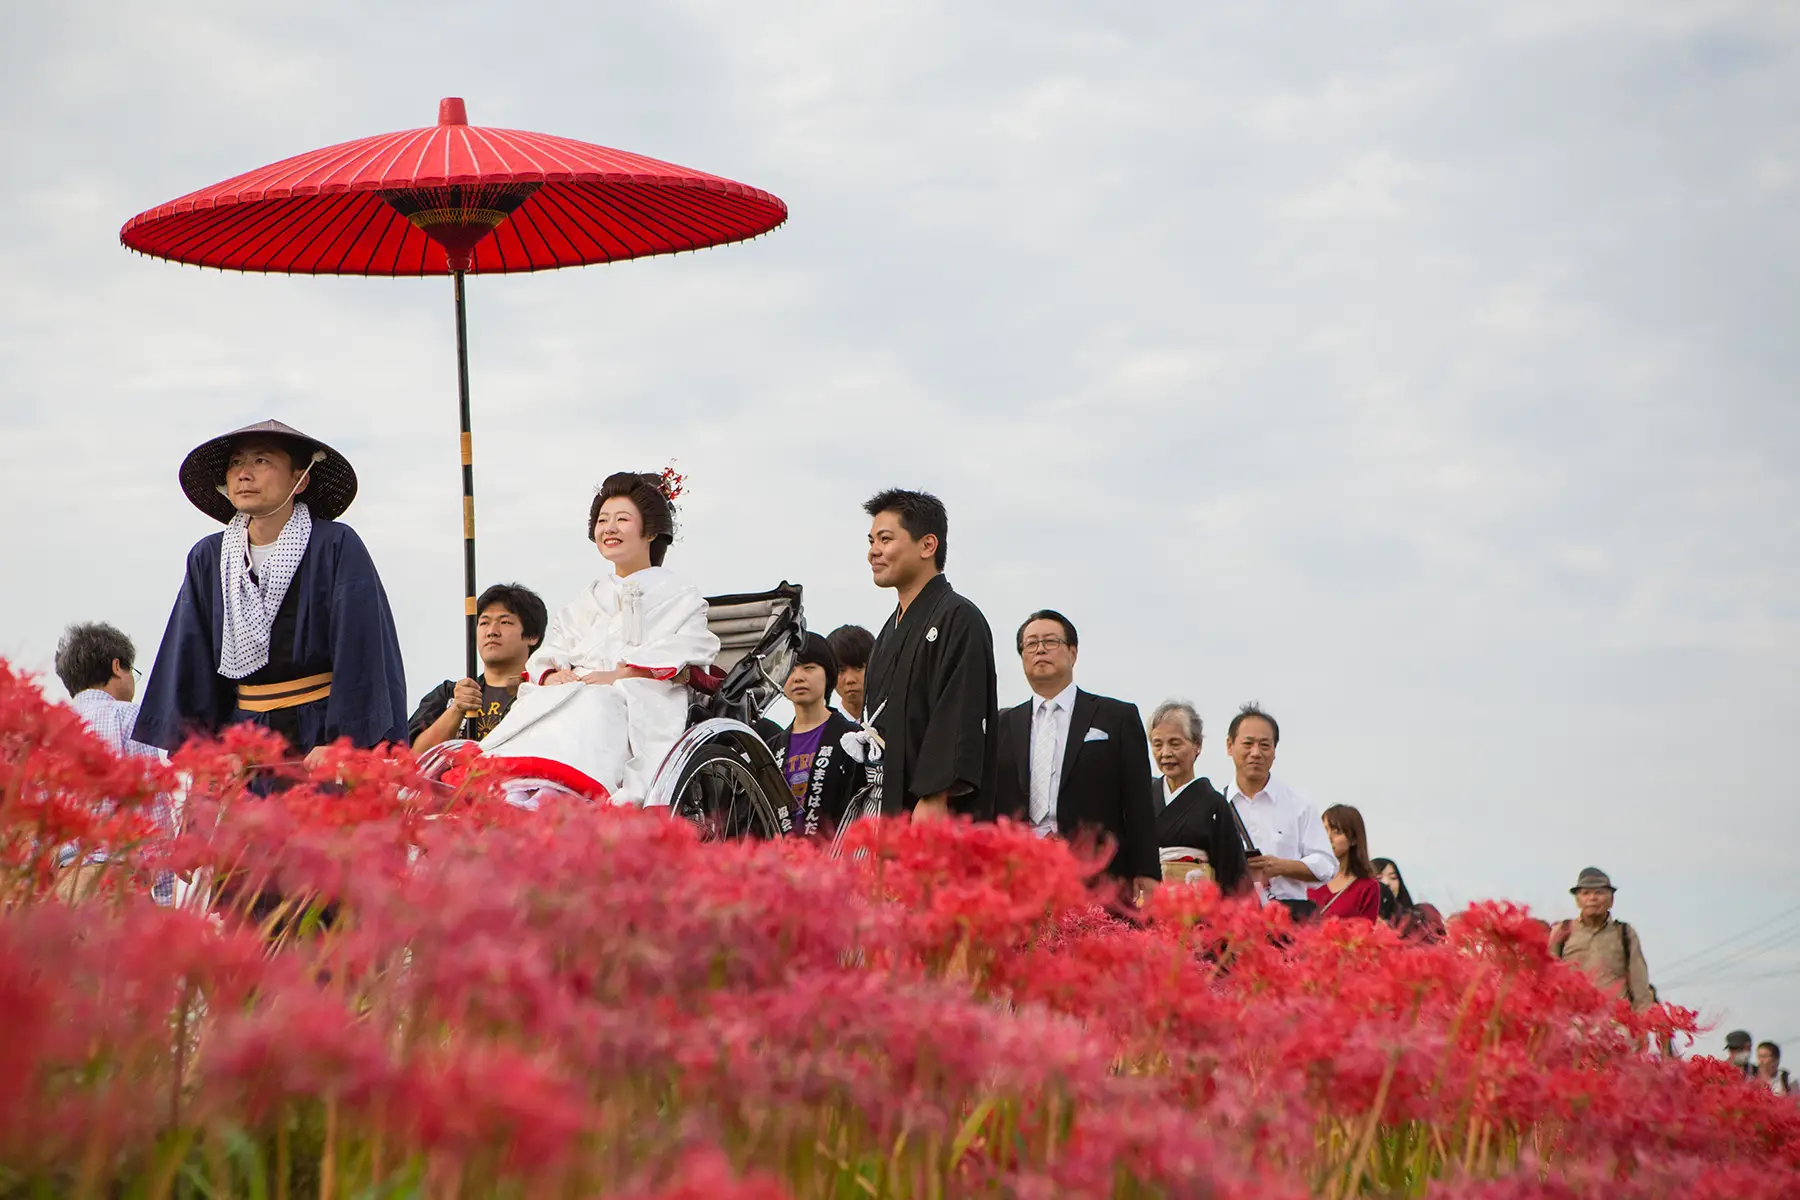 Lycoris Radiatas flowers in full bloom near the Yakachi River in Handa city where the bride rides in a rickshaw, and the groom walks alongside during their traditional Japanese style wedding.  